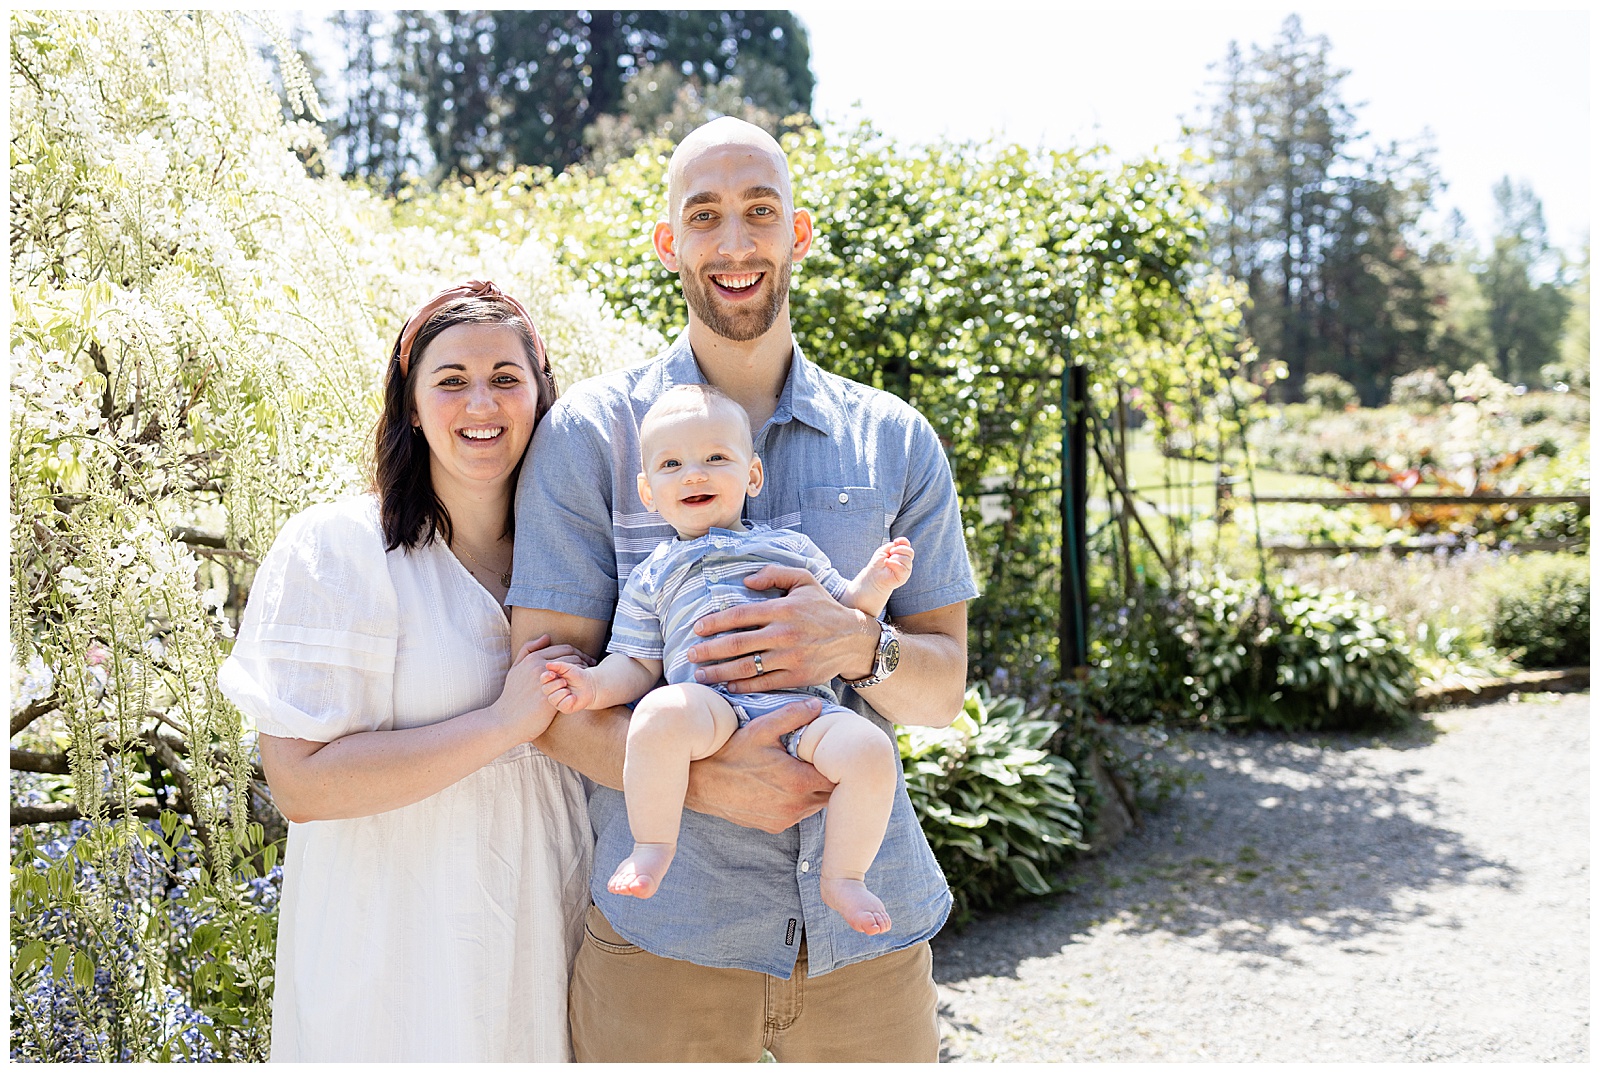 Family of 3 during 6 month milestone photos at Point Defiance Park in Tacoma, WA